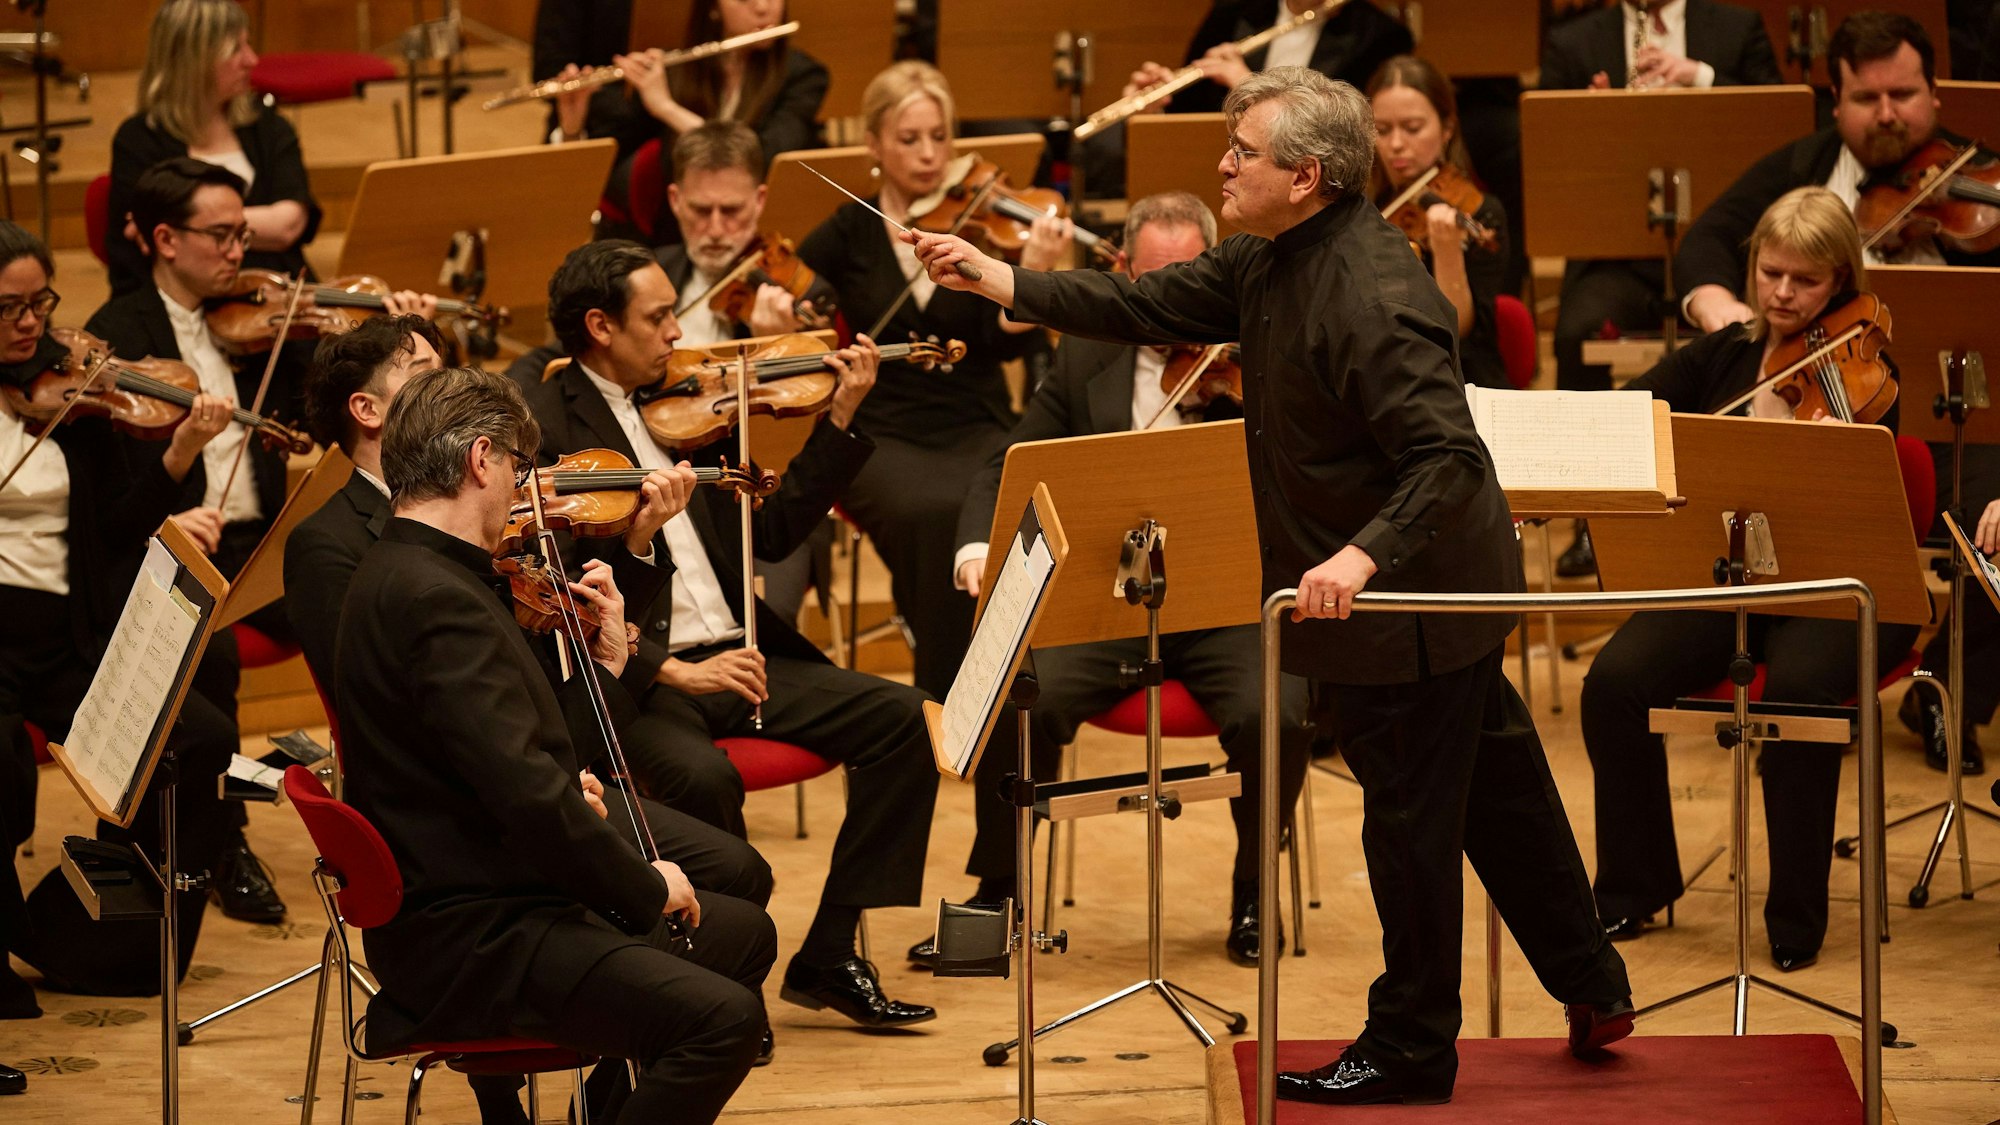 London Symphonie Orchestra - Pappano - Balsom in Philharmonie Cologne